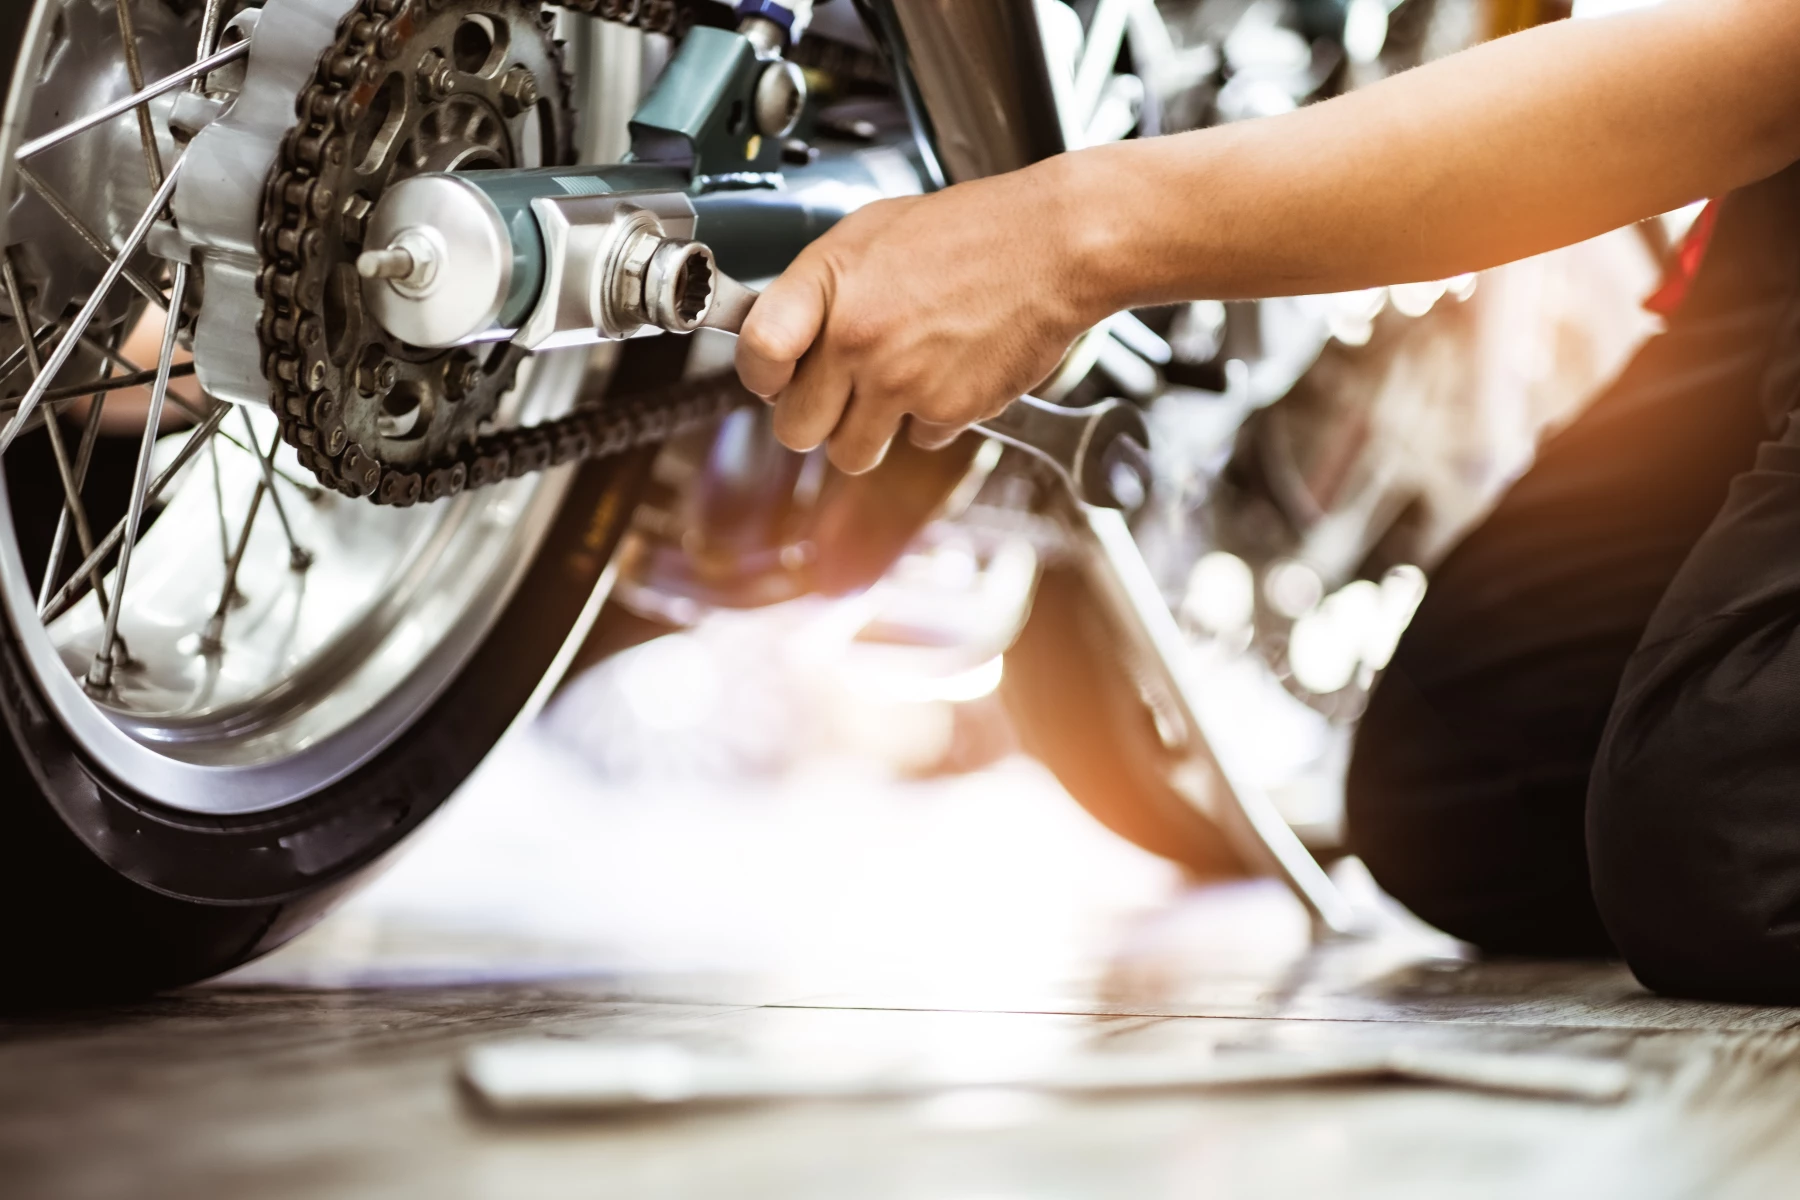 The motorcycle season starts - the battle for service customers begins!